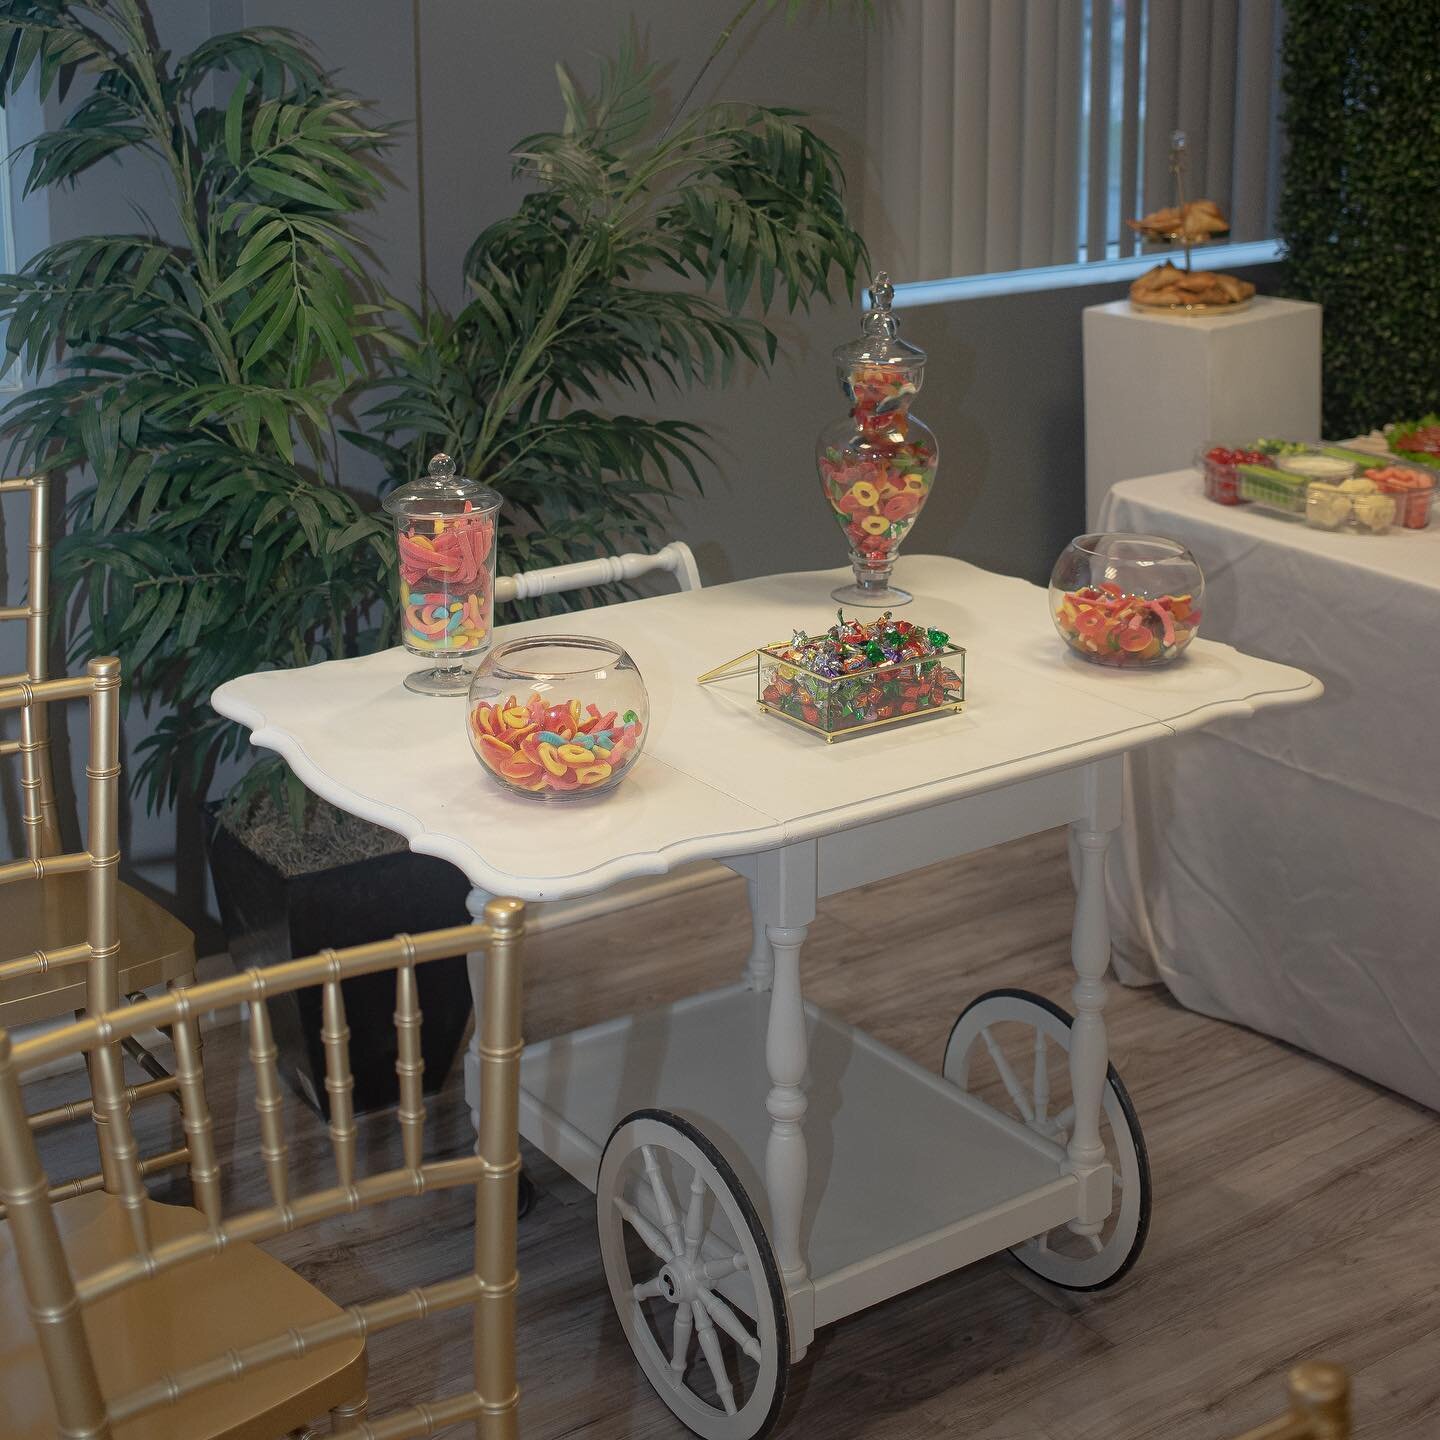 Thank you to @_eestudio  for trusting us to decor their record label ✨

Gold and green theme 🌿✨
.
.
. 

Rentals 
Gold chiavari chair @luxeventrental
Tea cart @luxeventrental 
Candy jar 🍭 🍬 @luxeventrental
White pillar @luxeventrental 
.
#recordlab